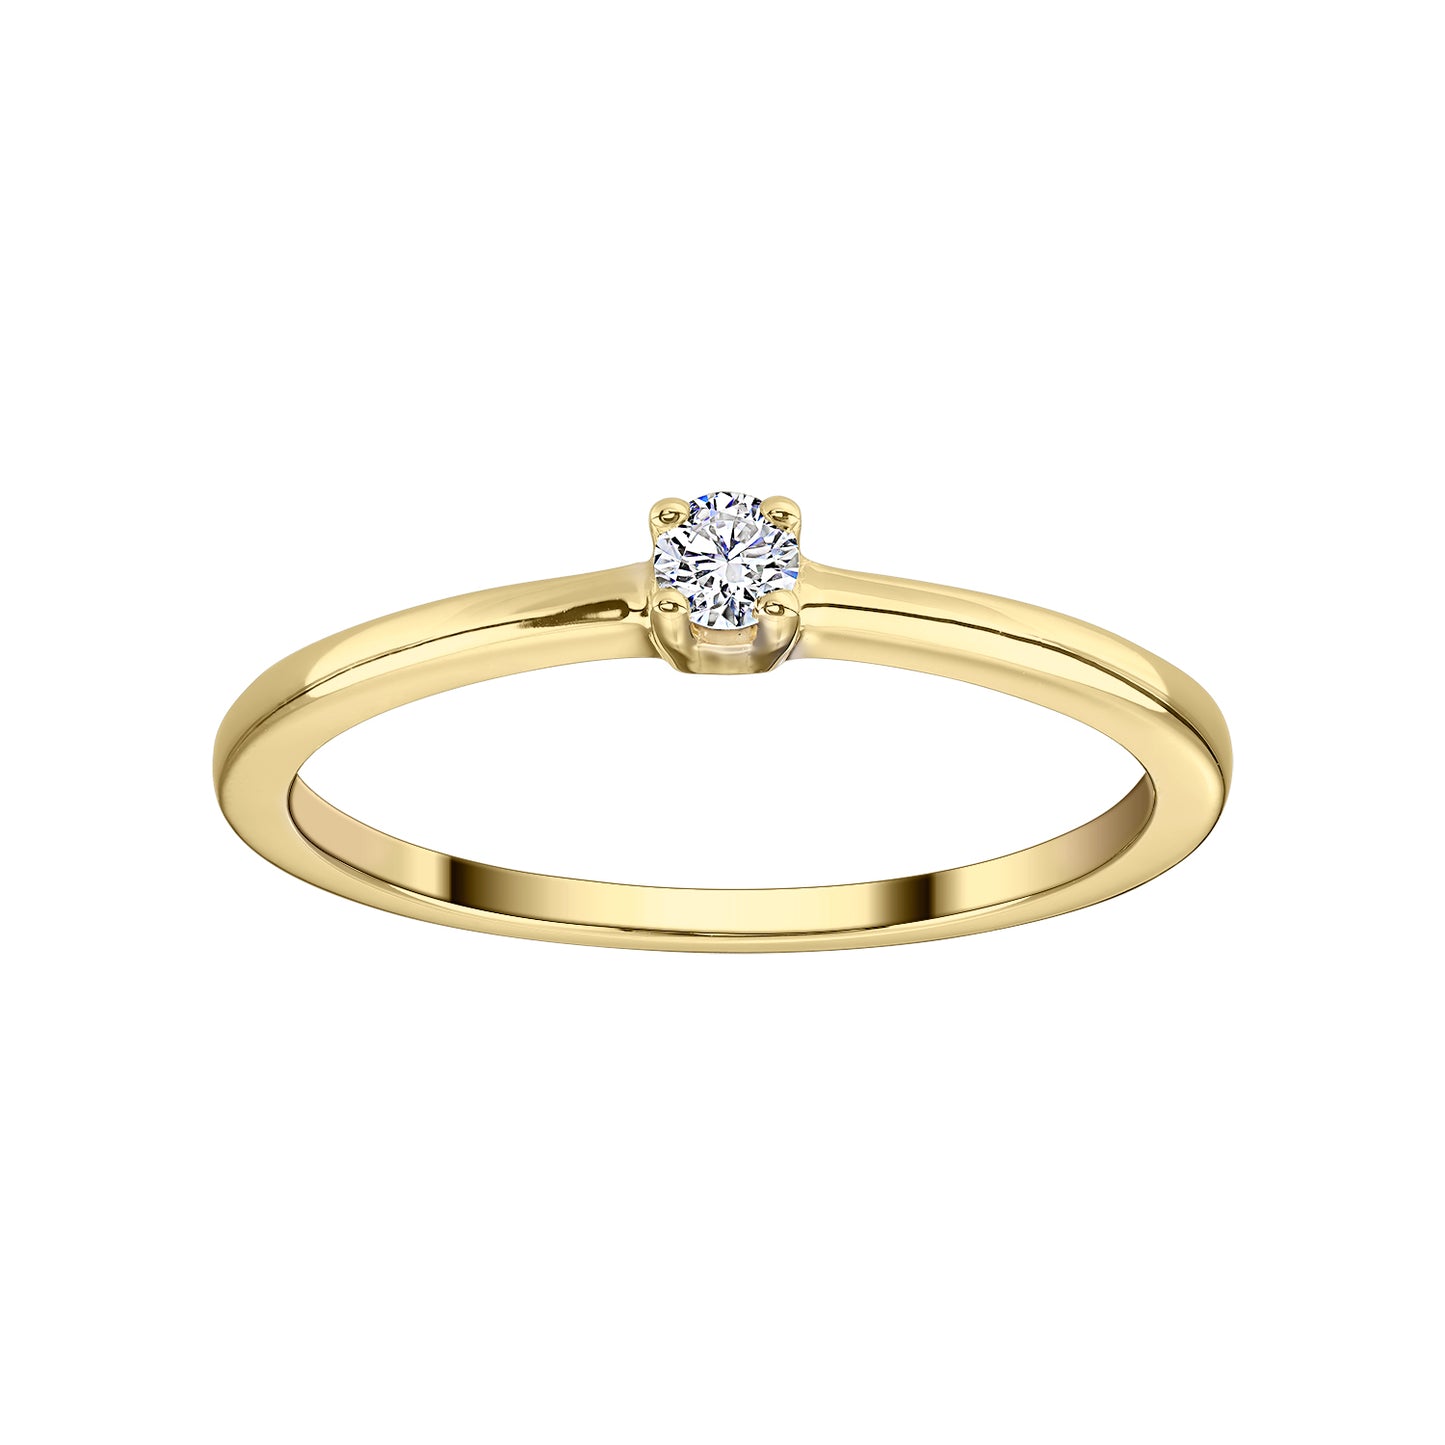 Gold Ring 14K (585) Sole with Diamond 0.07 ct - Gold